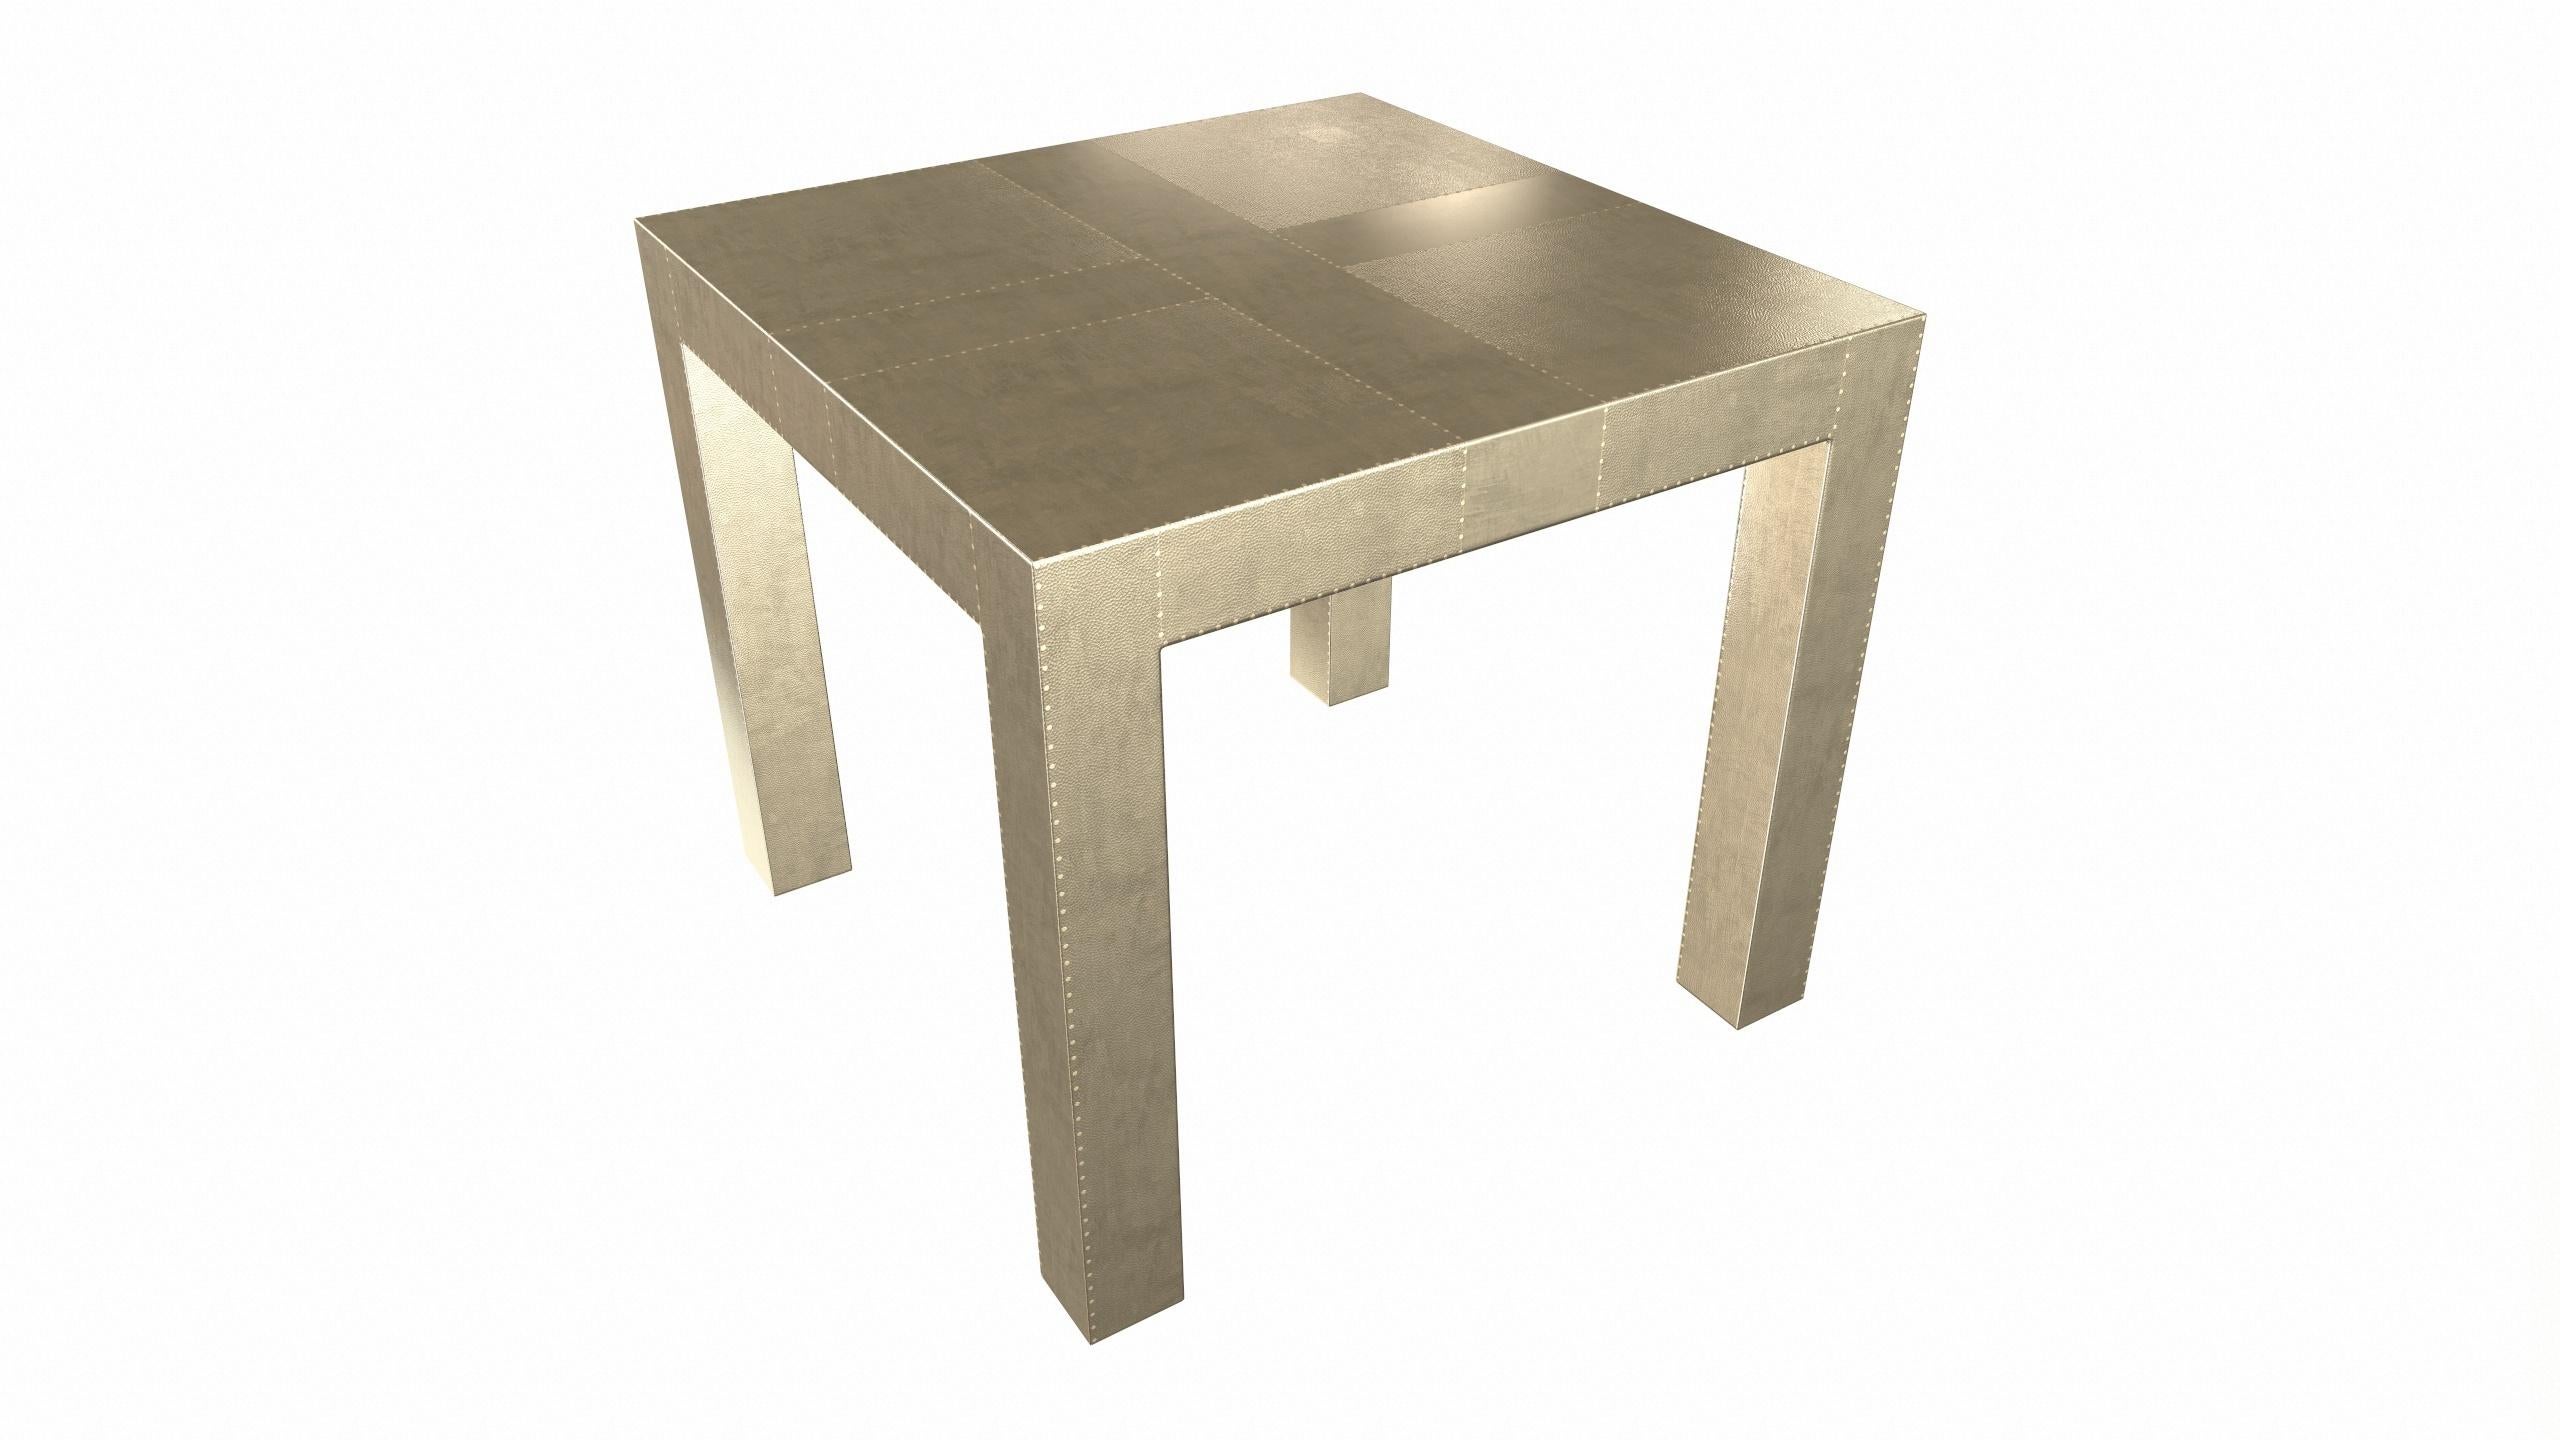 American Louise Art Deco Side Tables Square Drink Table Mid. Hammered Brass For Sale